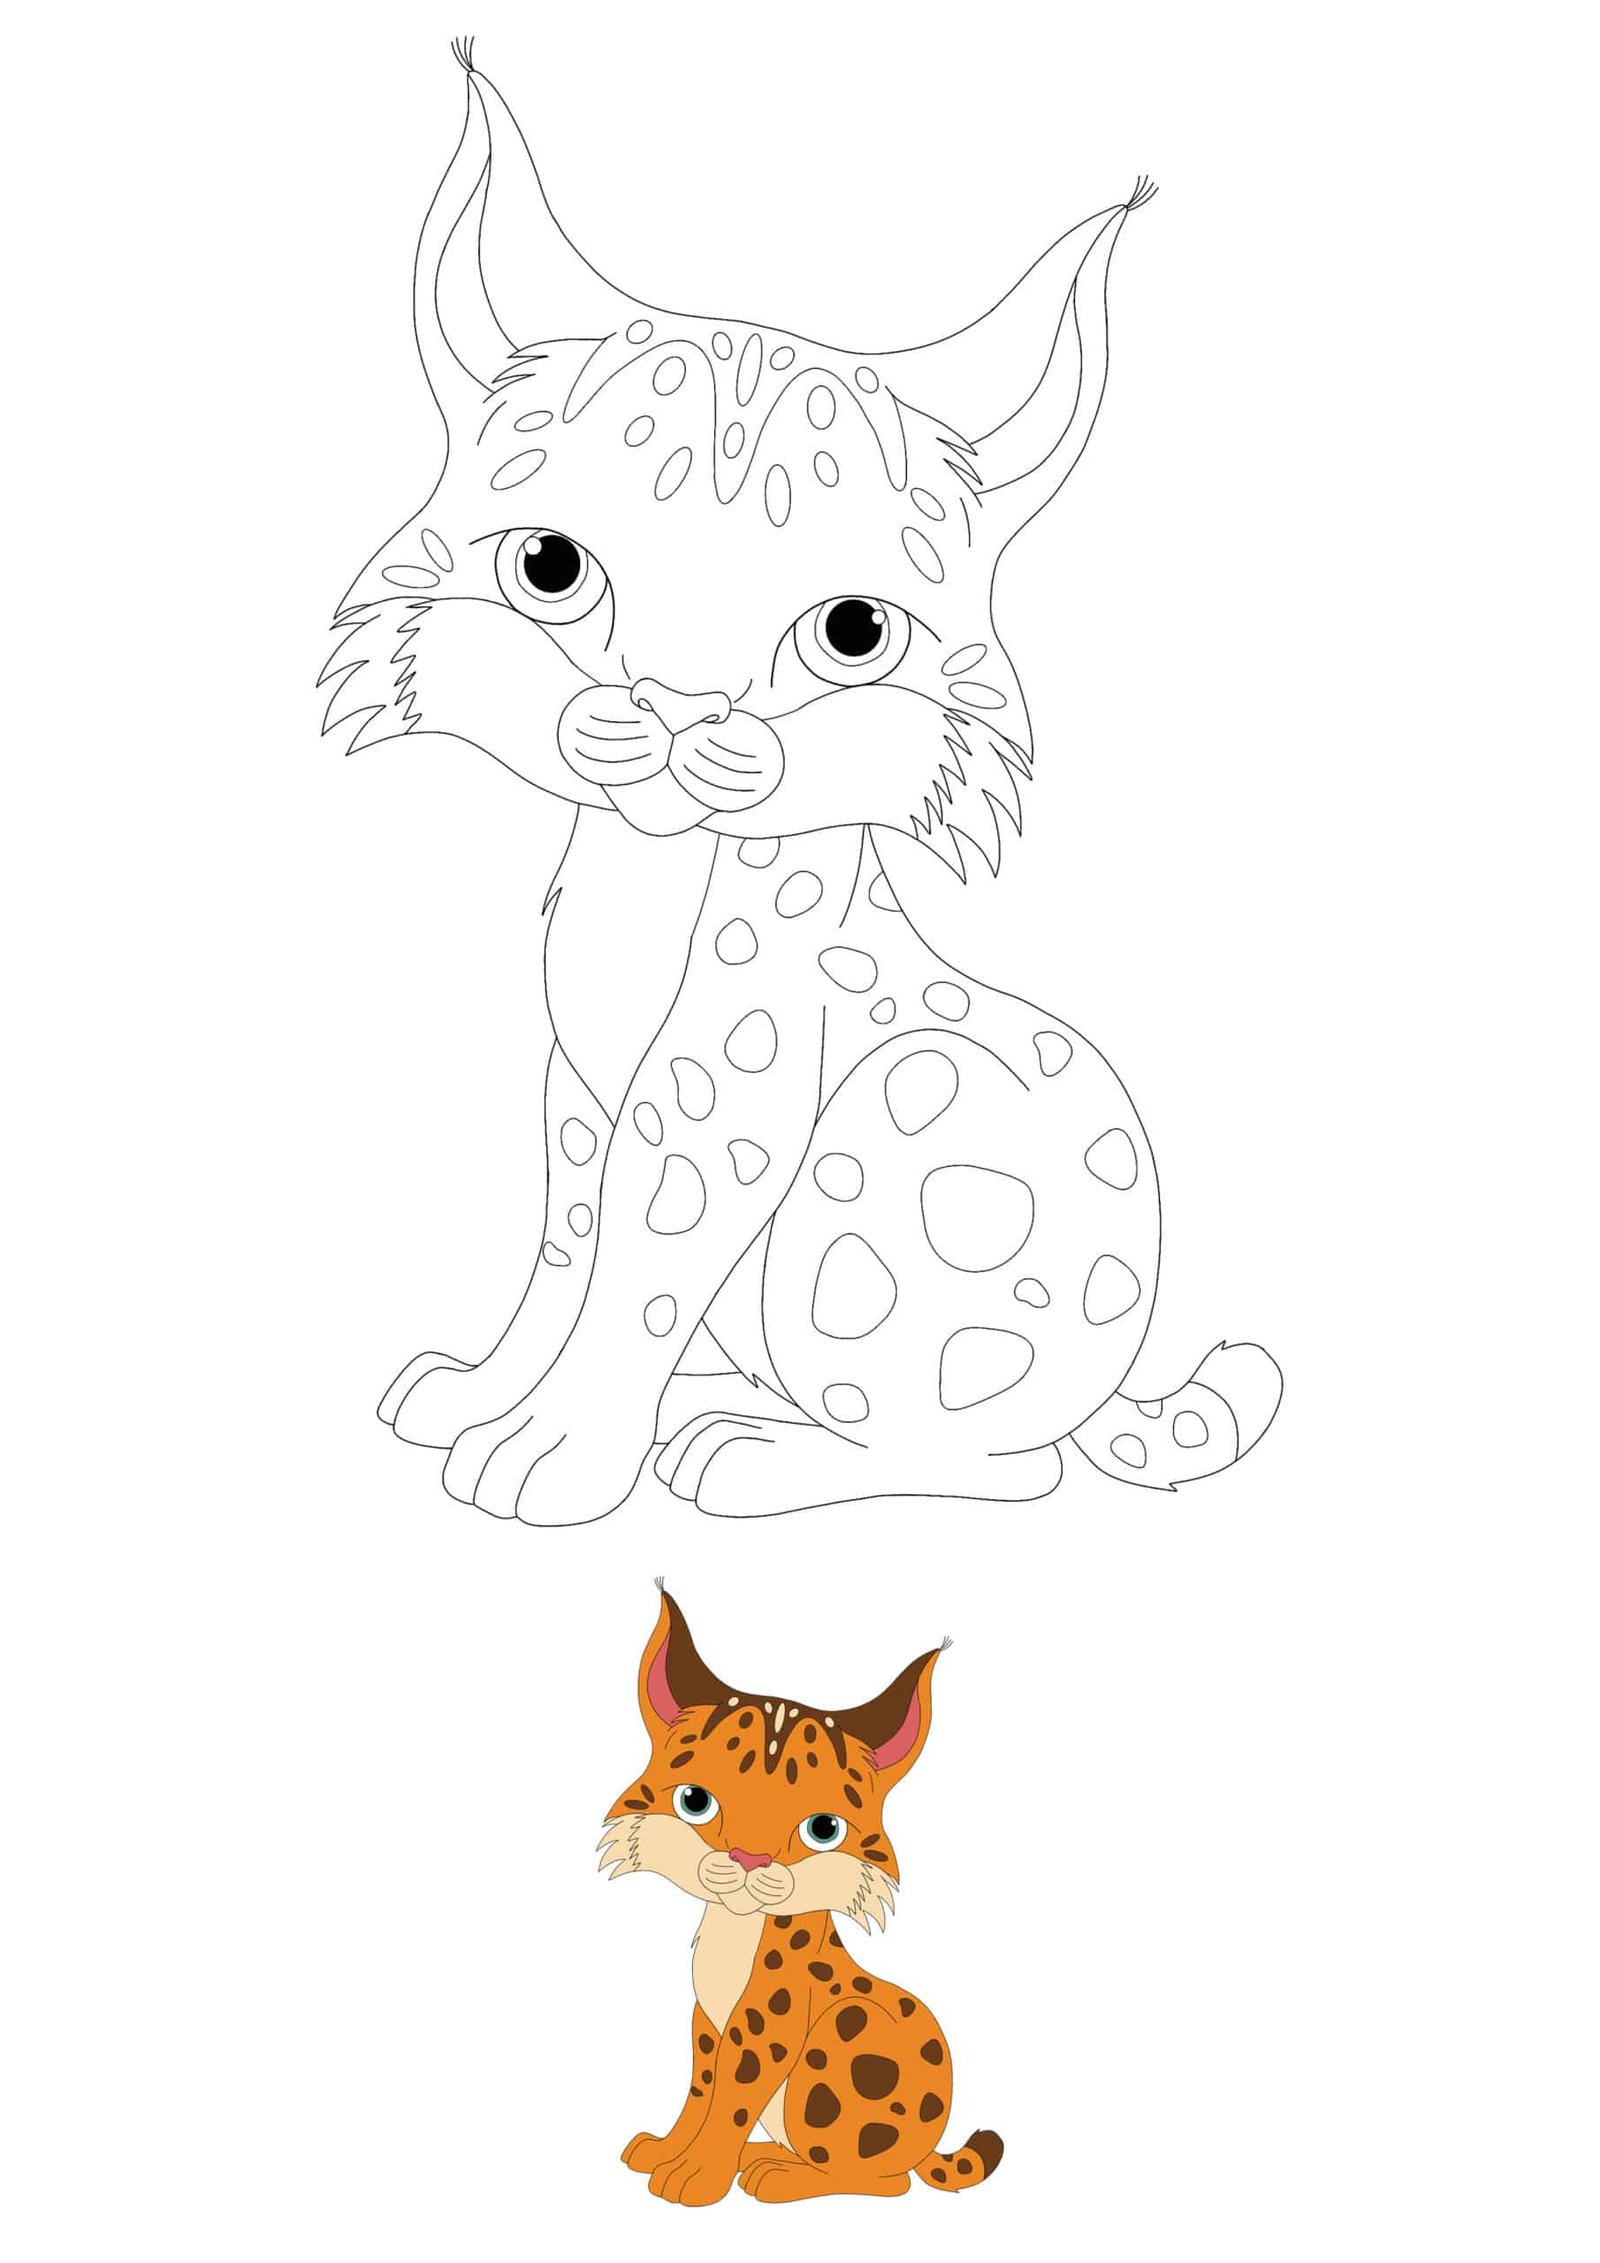 Baby Wild Cat coloring page for boys and girls